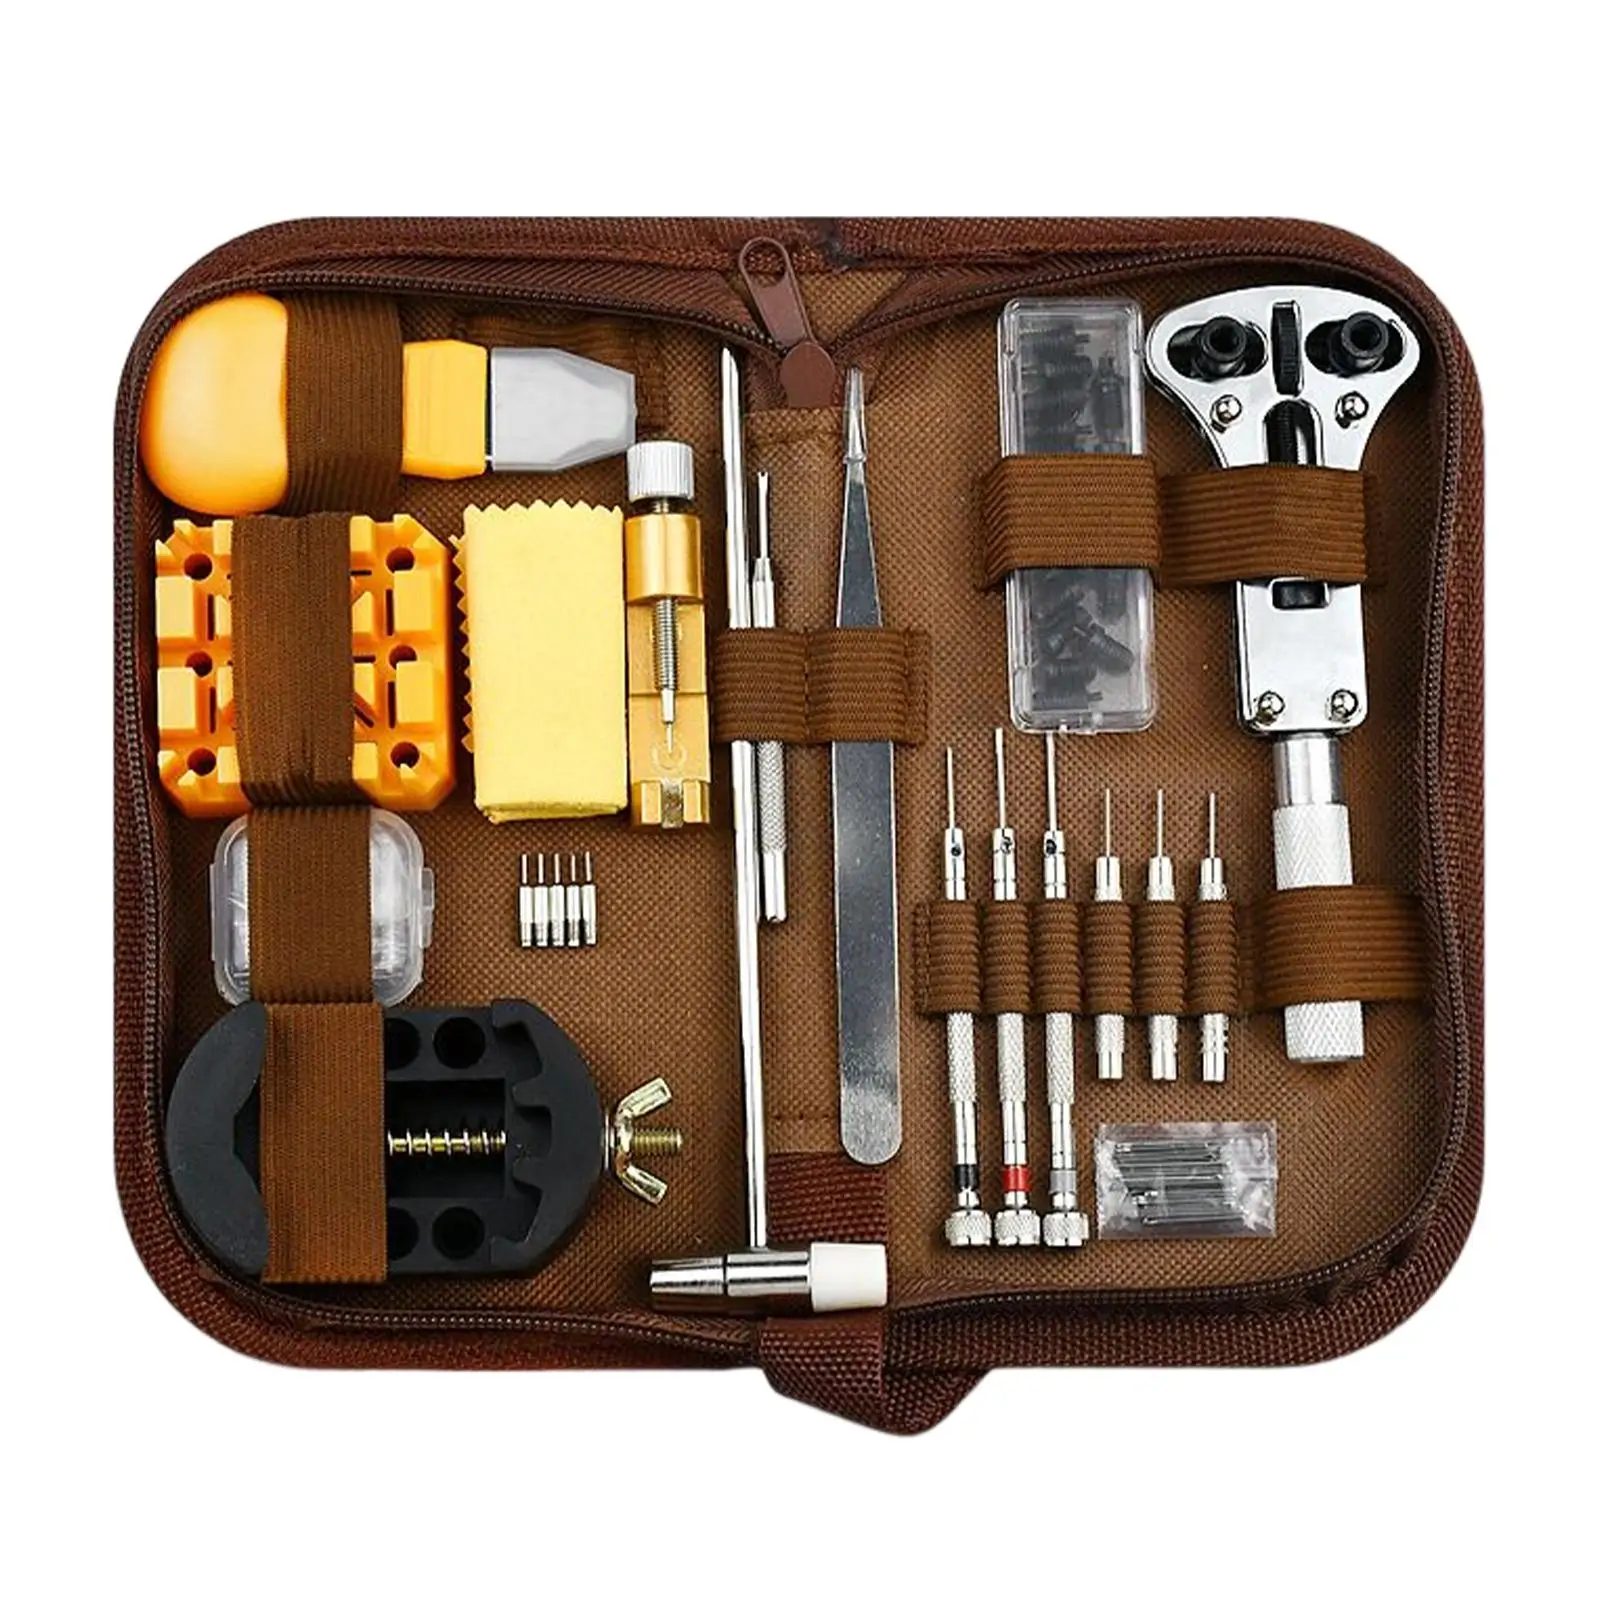 168 Pieces Watch Repair Tool Kit Multifunctional Portable Tweezers Spring Bar Carrying Case Adjust 5 Extra Pins Link Pin Removal